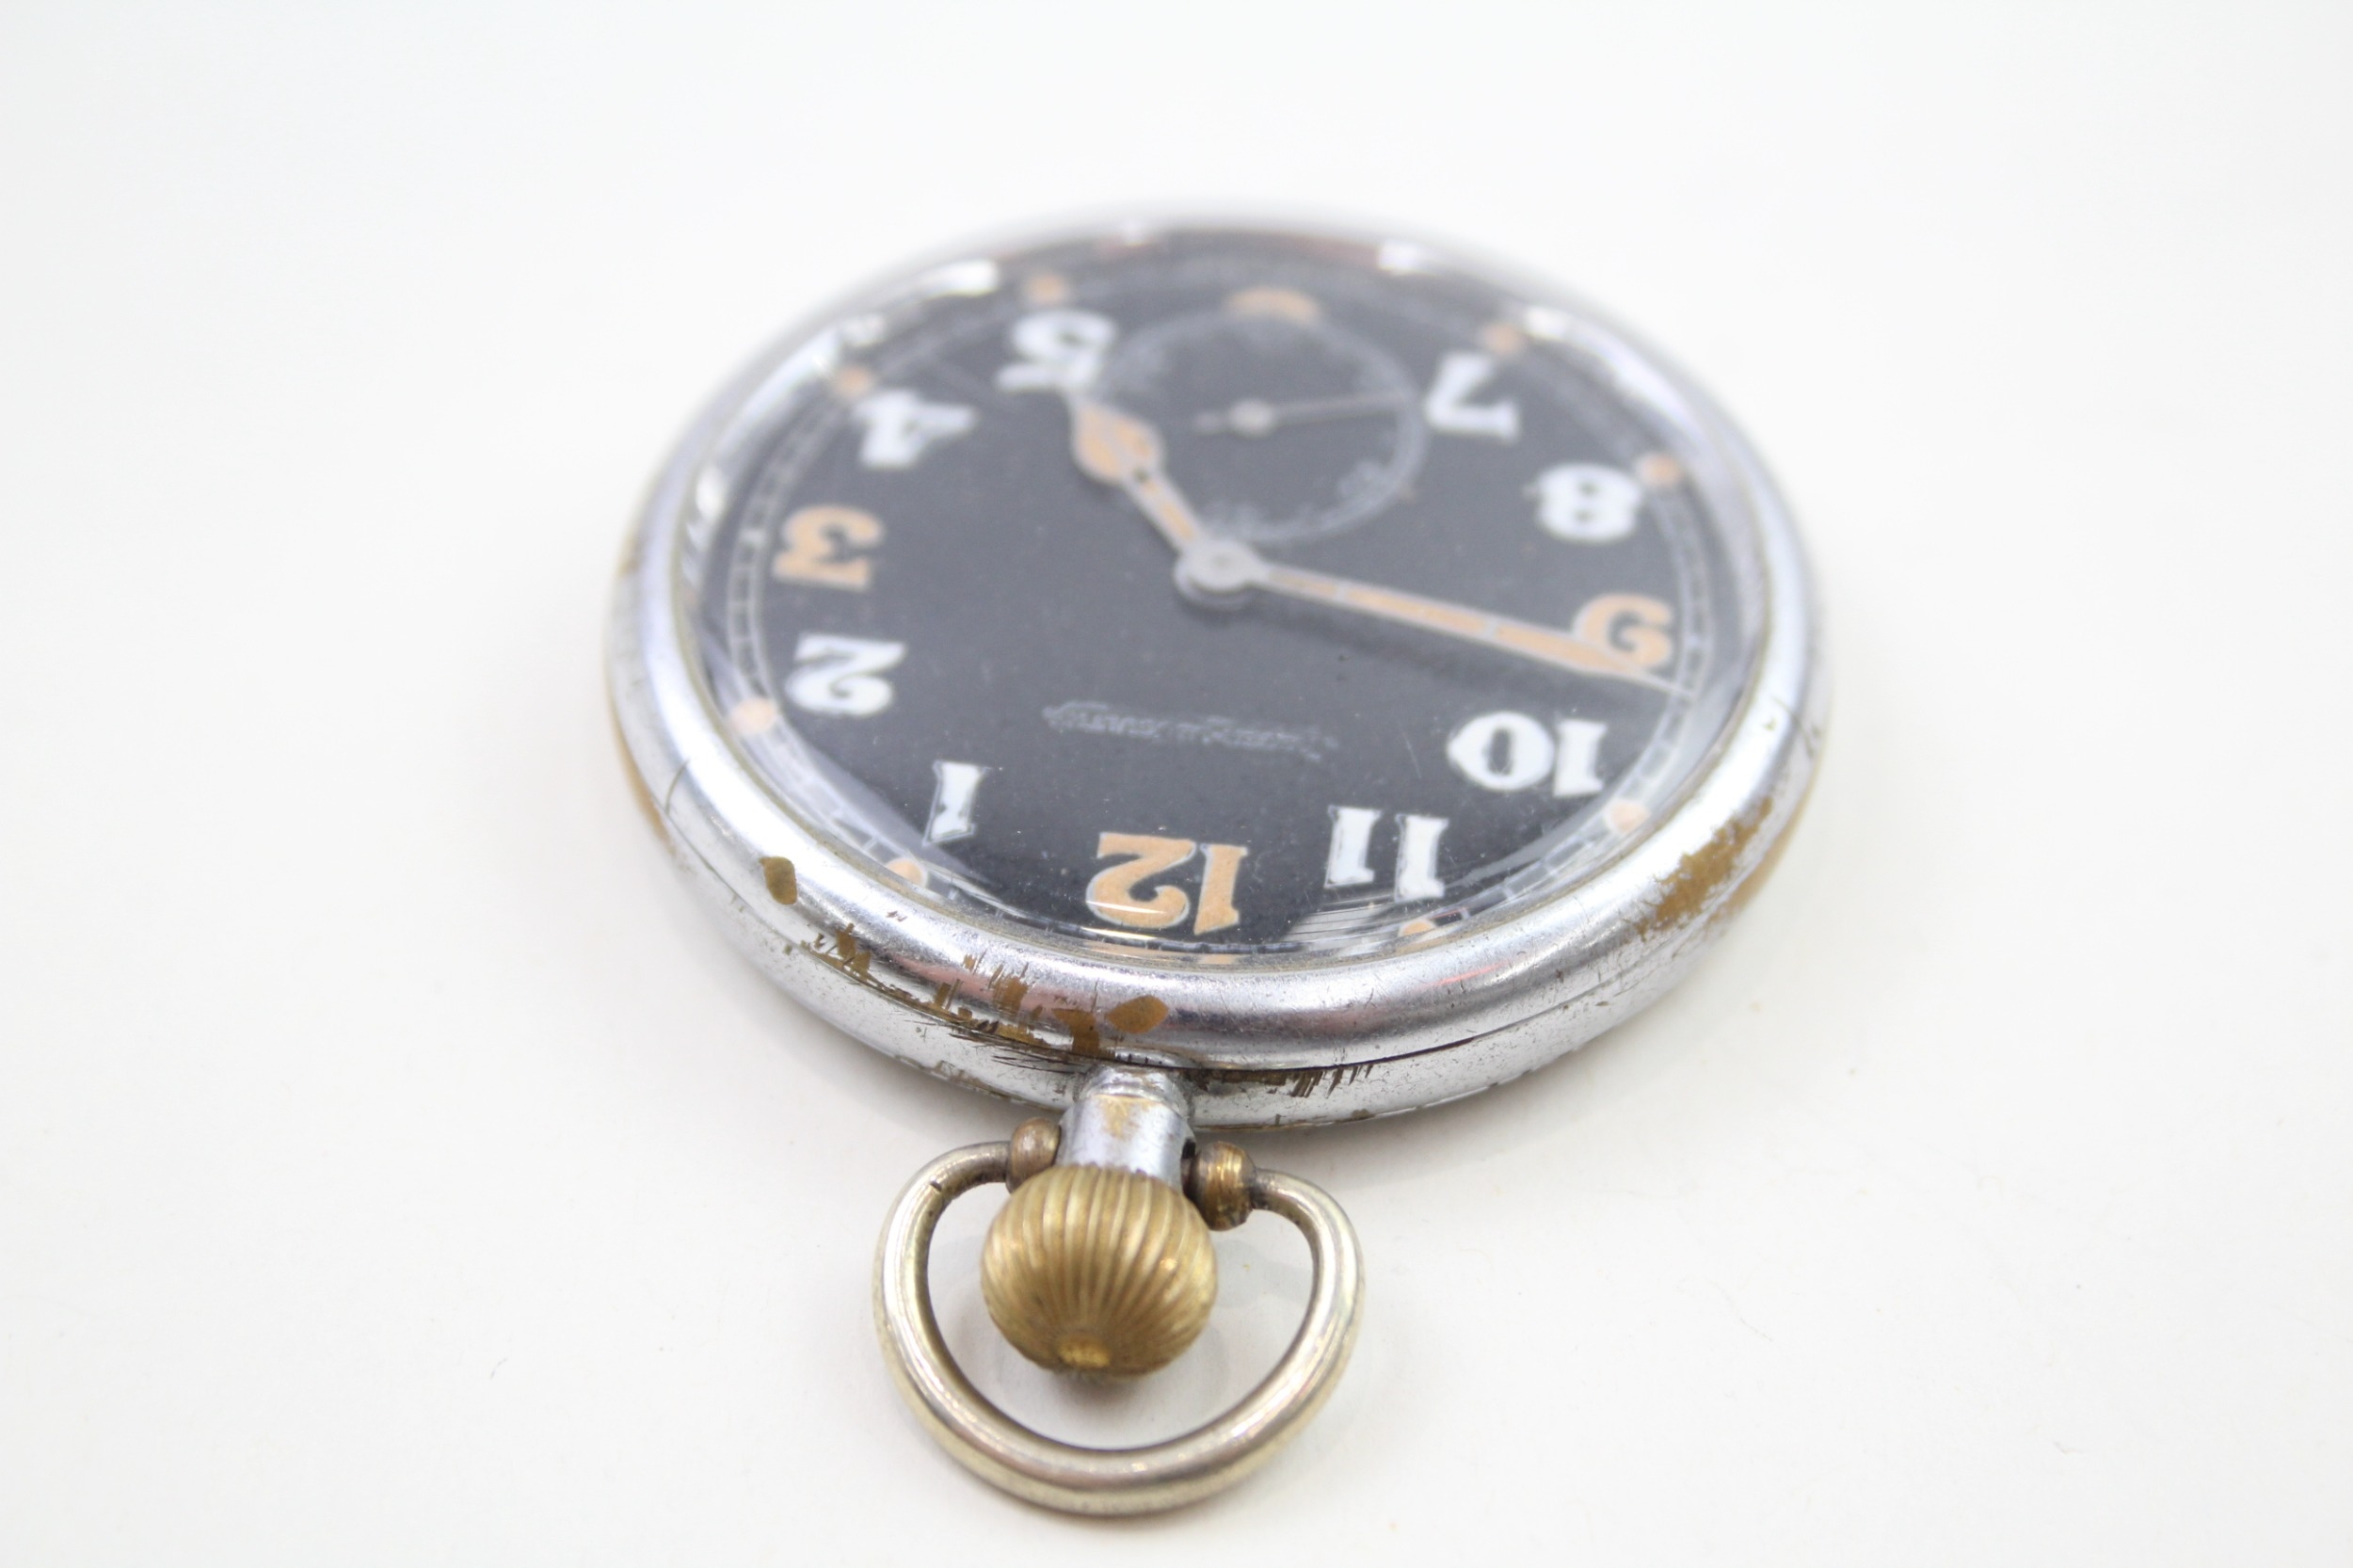 Mens Jaeger-Le Coultre GSTP Military Issue POCKET WATCH Hand Wind Working - Image 3 of 5